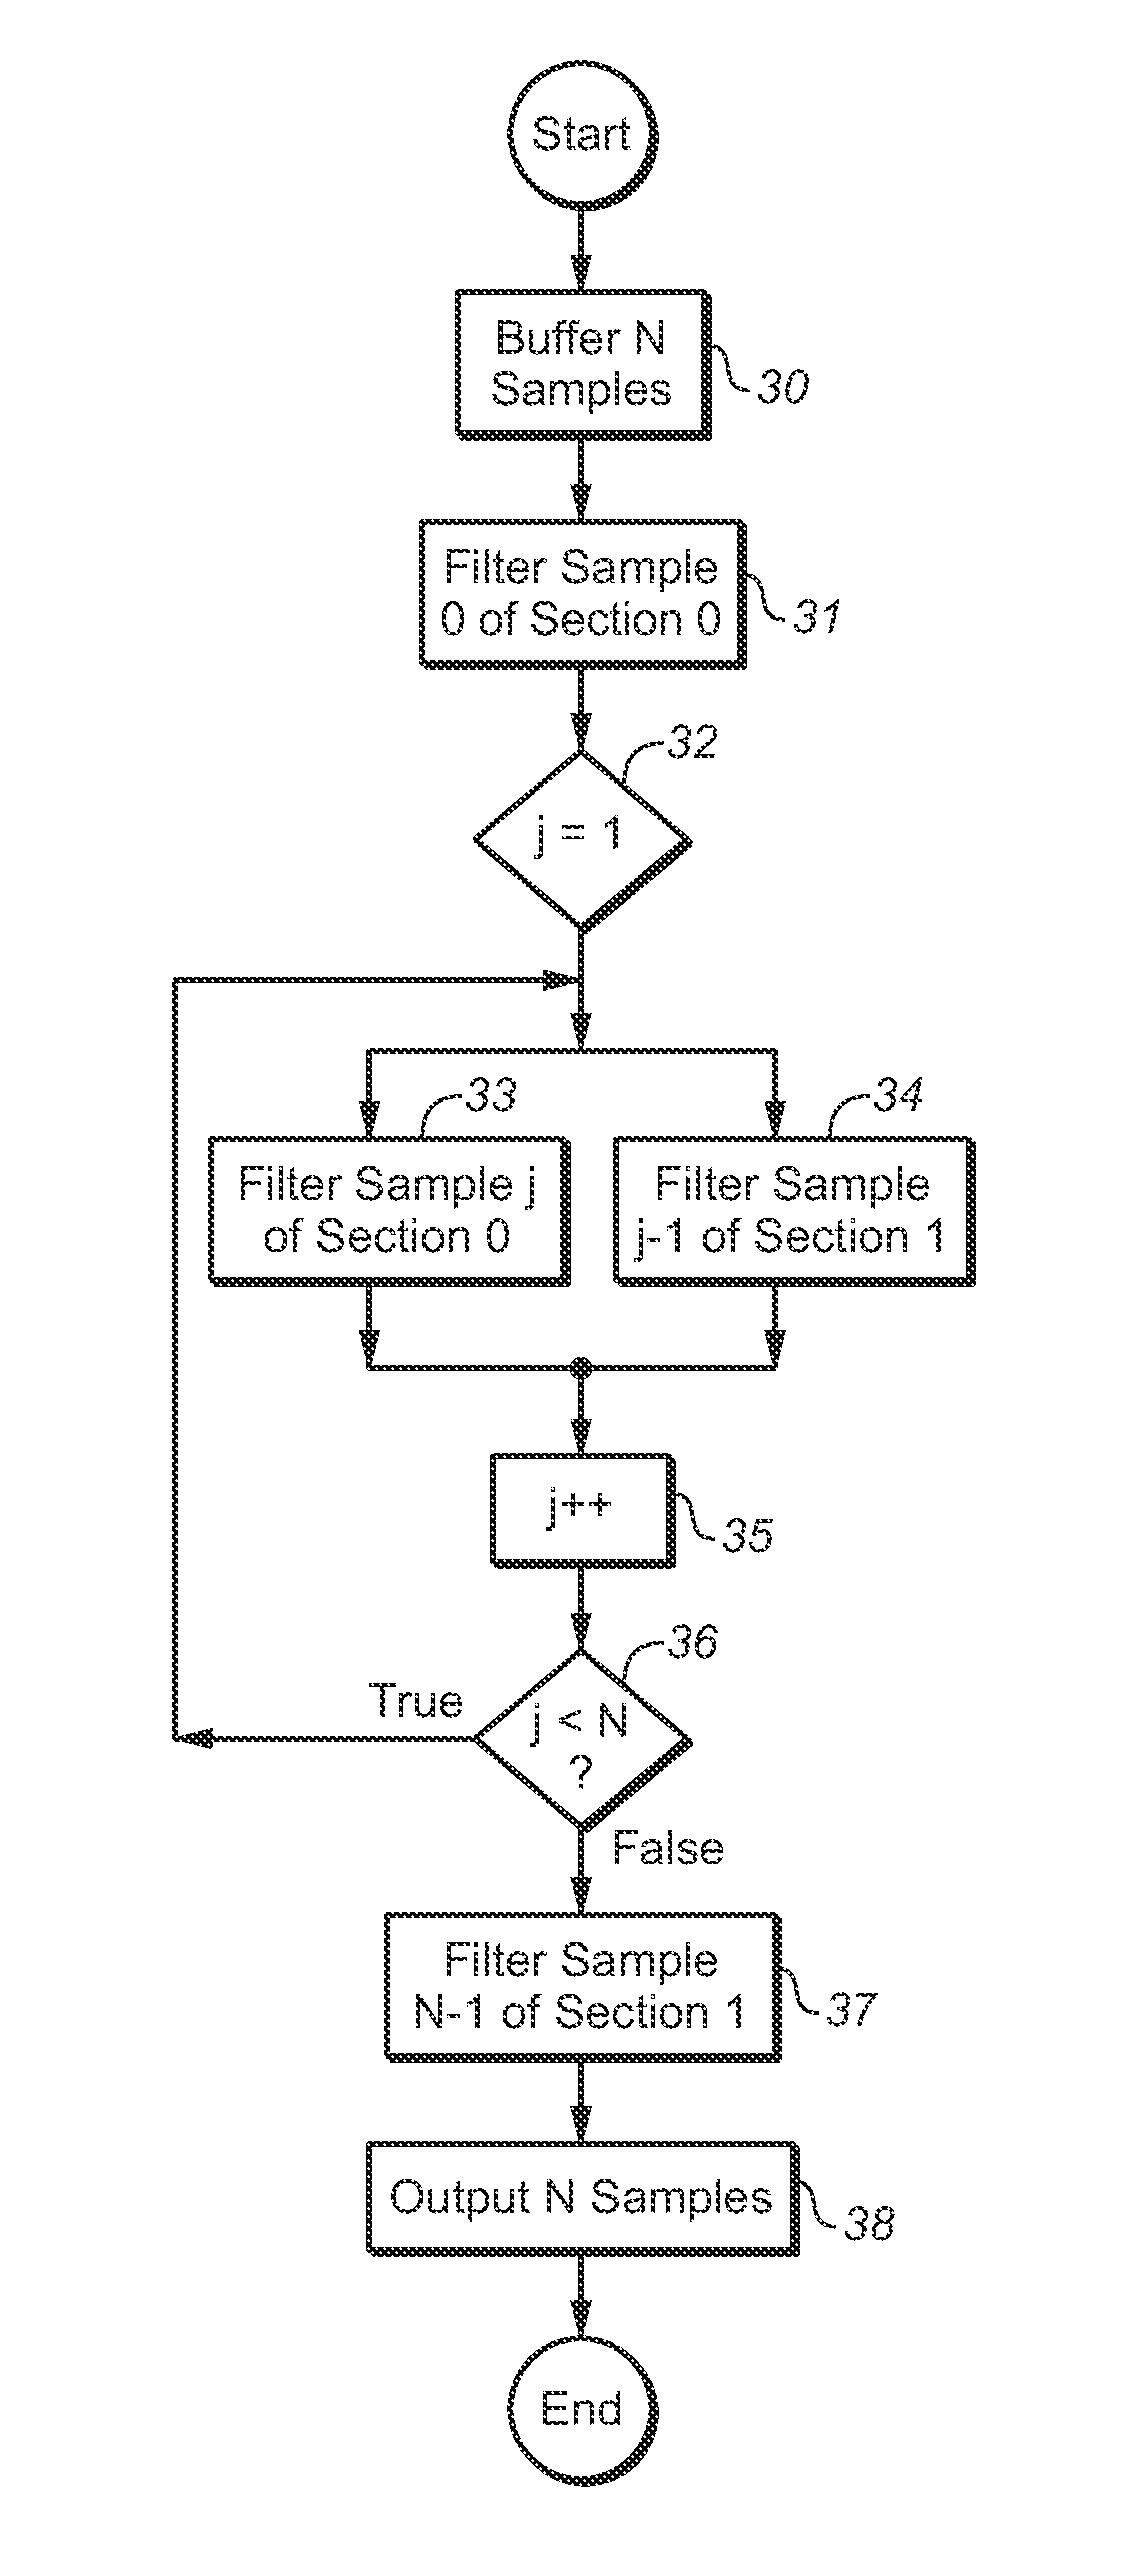 Multistage IIR Filter and Parallelized Filtering of Data with Same